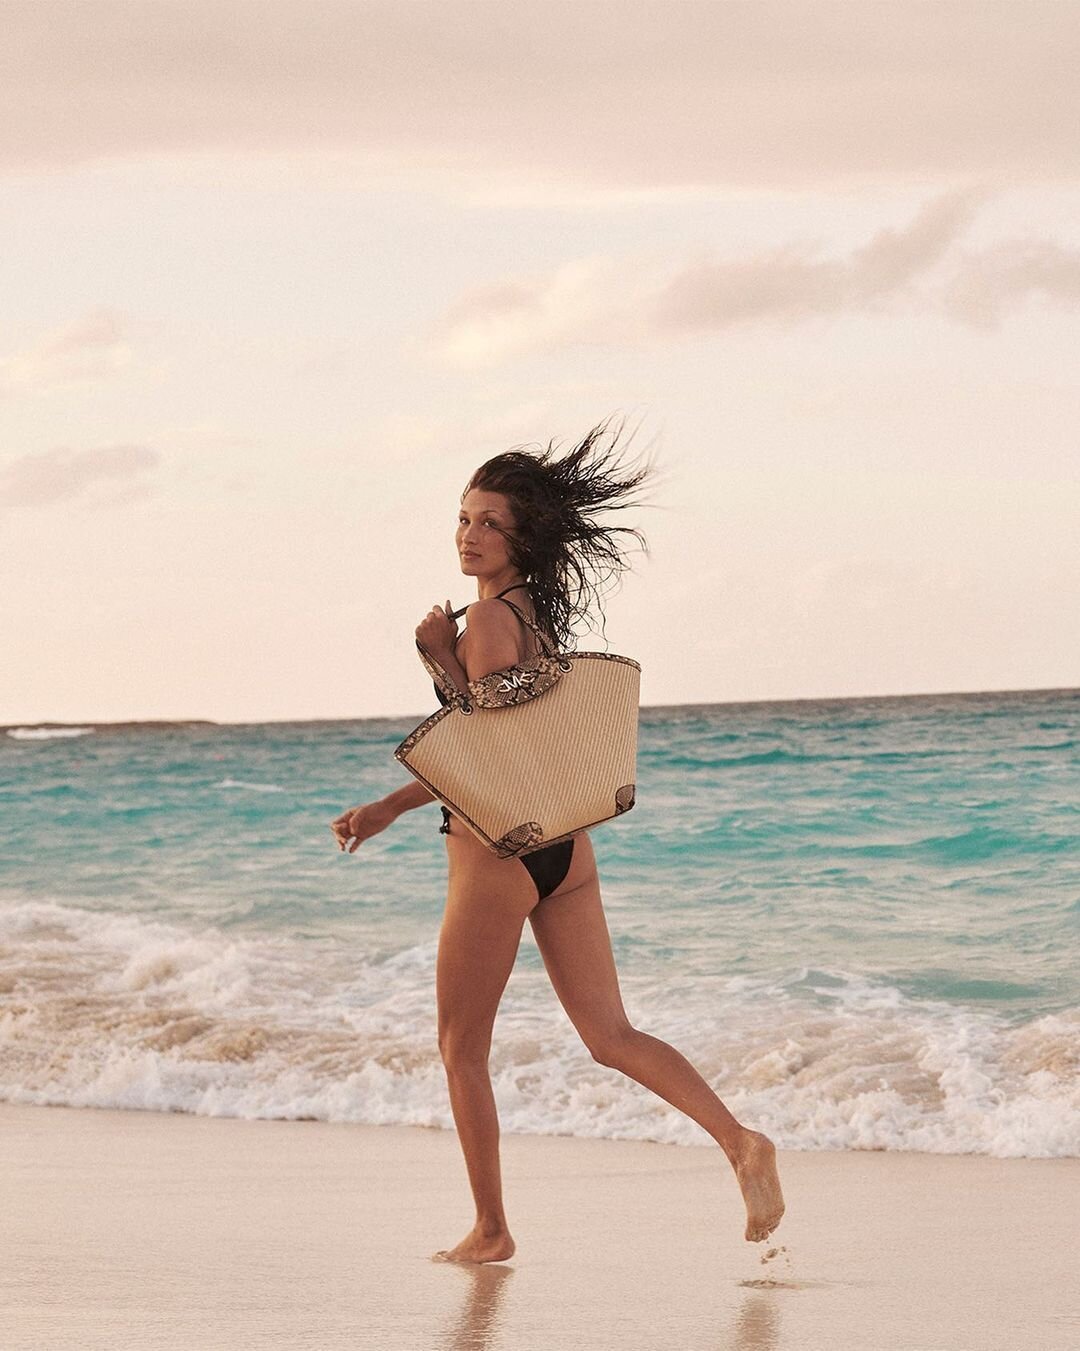 THE EYE HAS TO TRAVEL: Jet-setter Bella Hadid rediscovers iconic